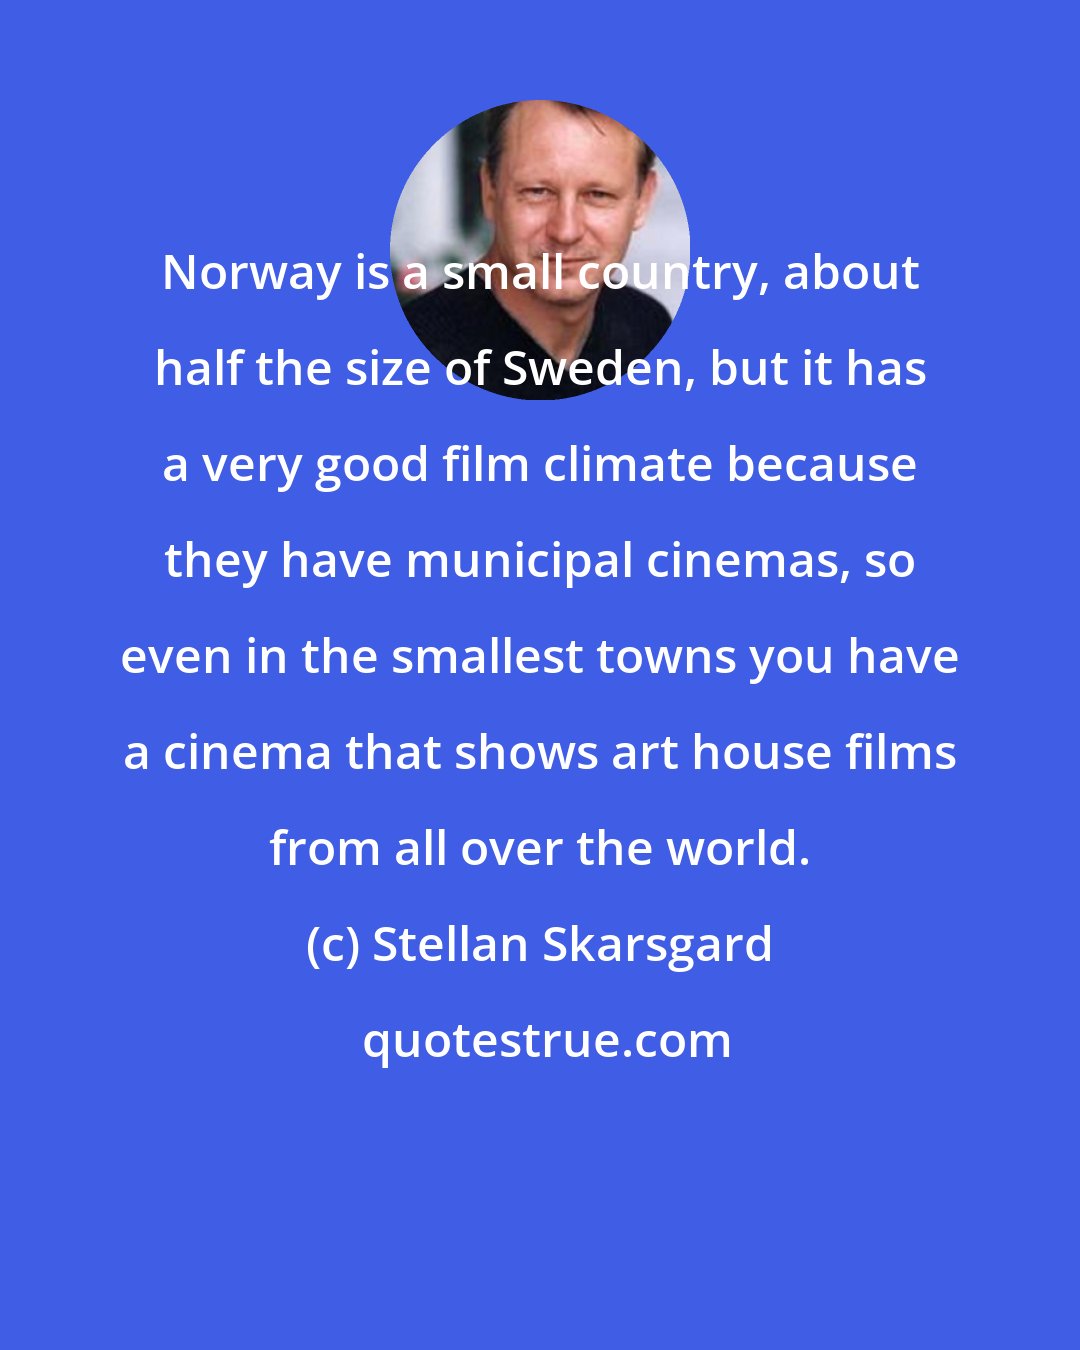 Stellan Skarsgard: Norway is a small country, about half the size of Sweden, but it has a very good film climate because they have municipal cinemas, so even in the smallest towns you have a cinema that shows art house films from all over the world.